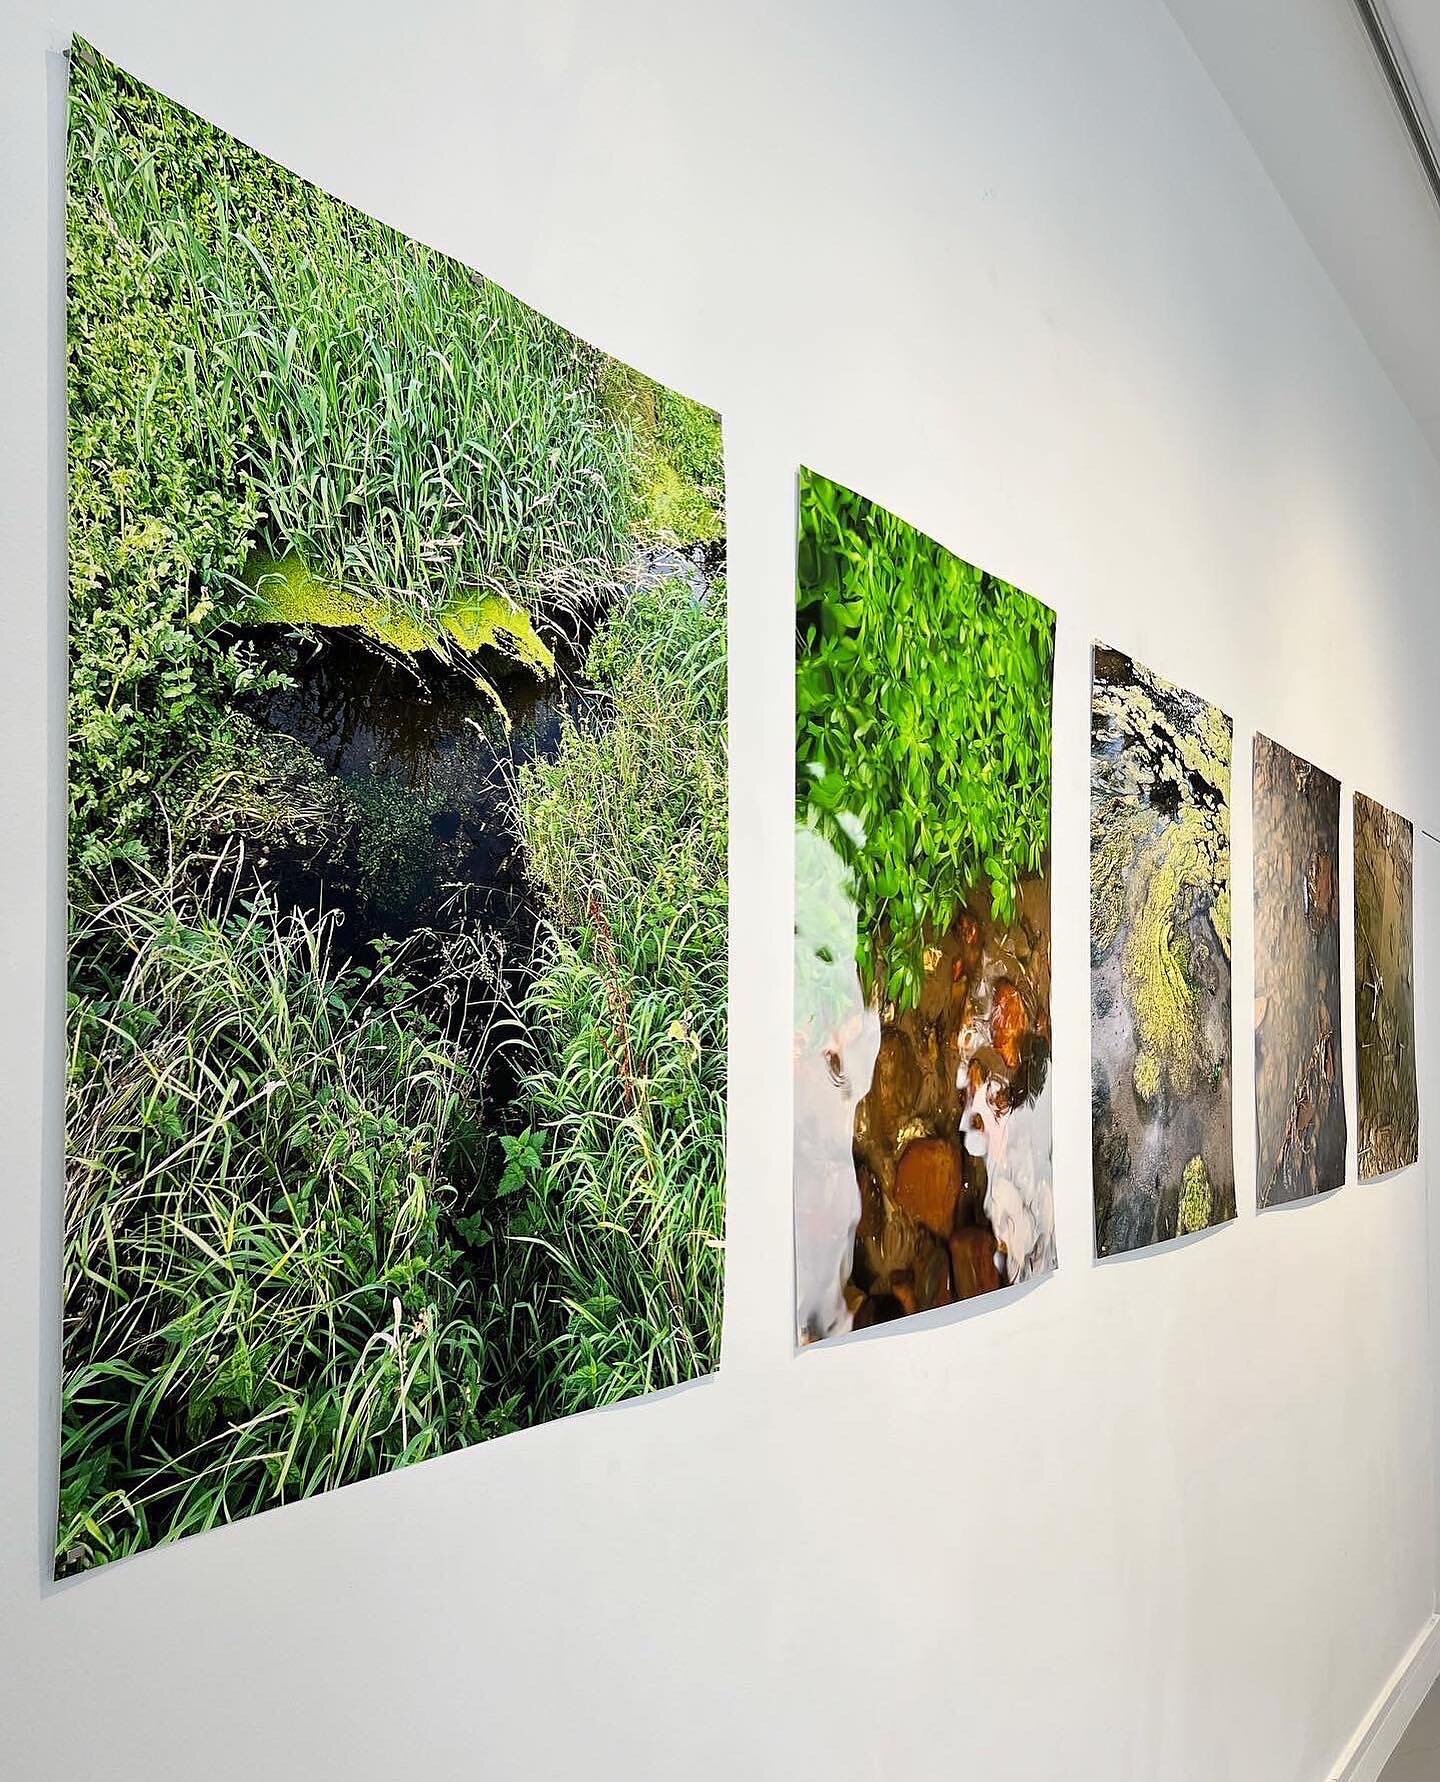 We&rsquo;ve all been busy installing the latest iteration of Groundwork Gallery&rsquo;s &lsquo;The Ground Beneath Our Feet&rsquo; exhibition. The work produced in response to field trips, museum visits and immersion in the landscape has resulted in s